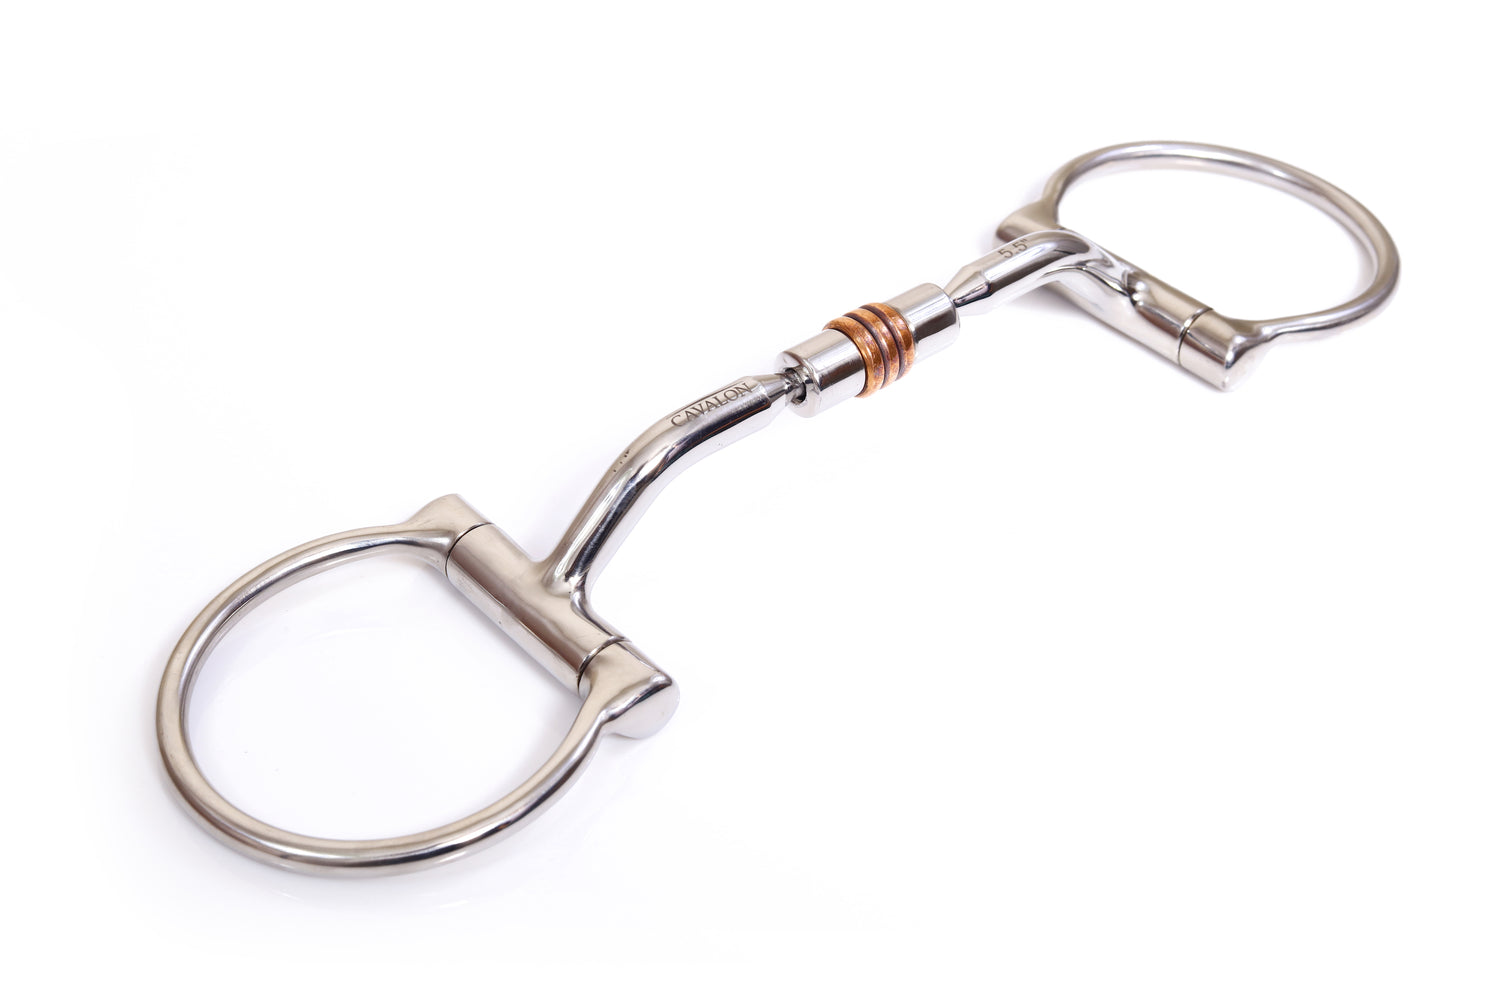 Cavalon D Ring Comfort Snaffle Bit with Copper Rollers